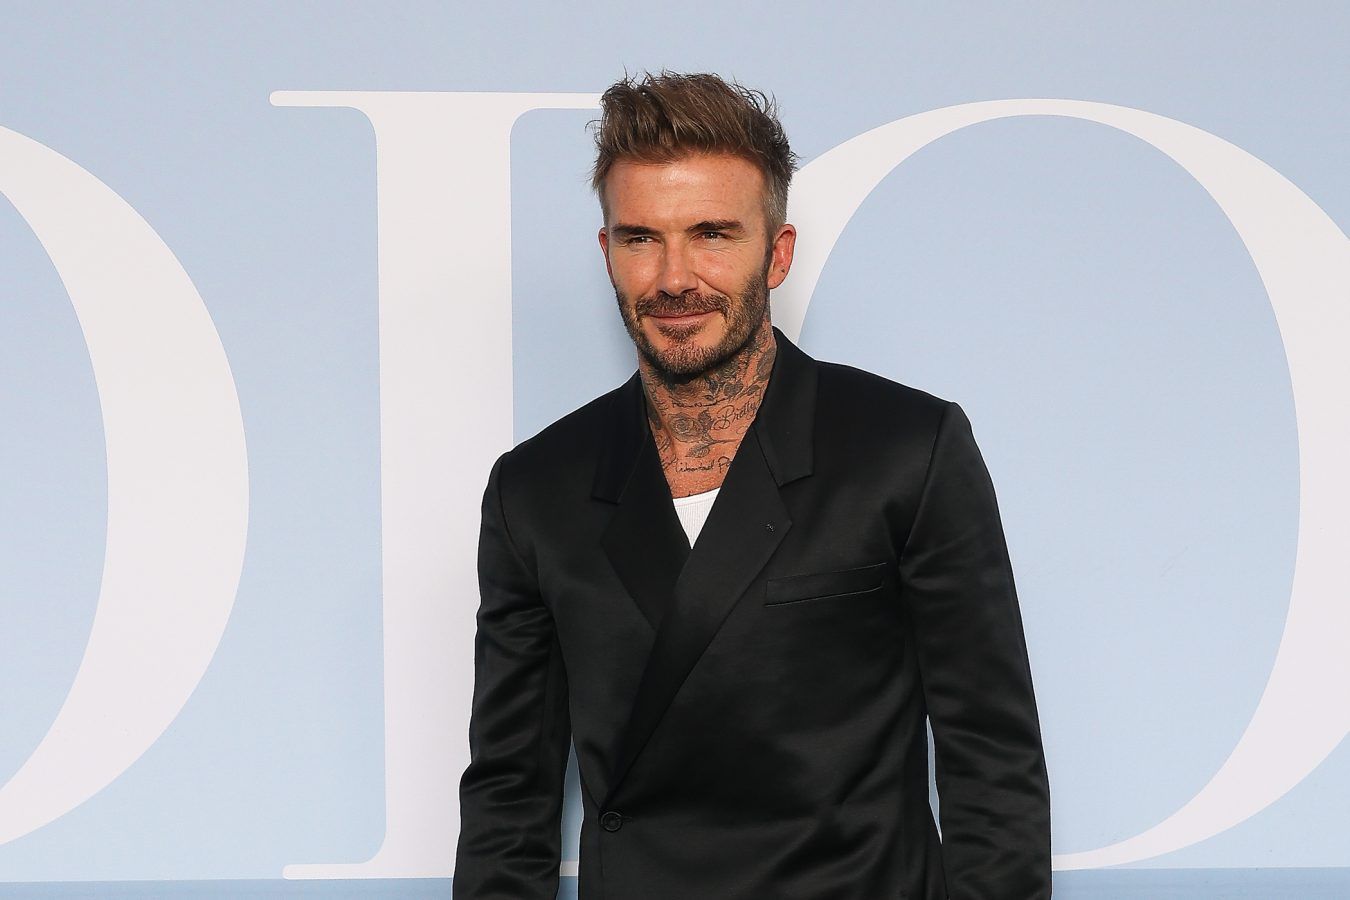 David Beckham and 14 other famous people born in the Year of the Rabbit